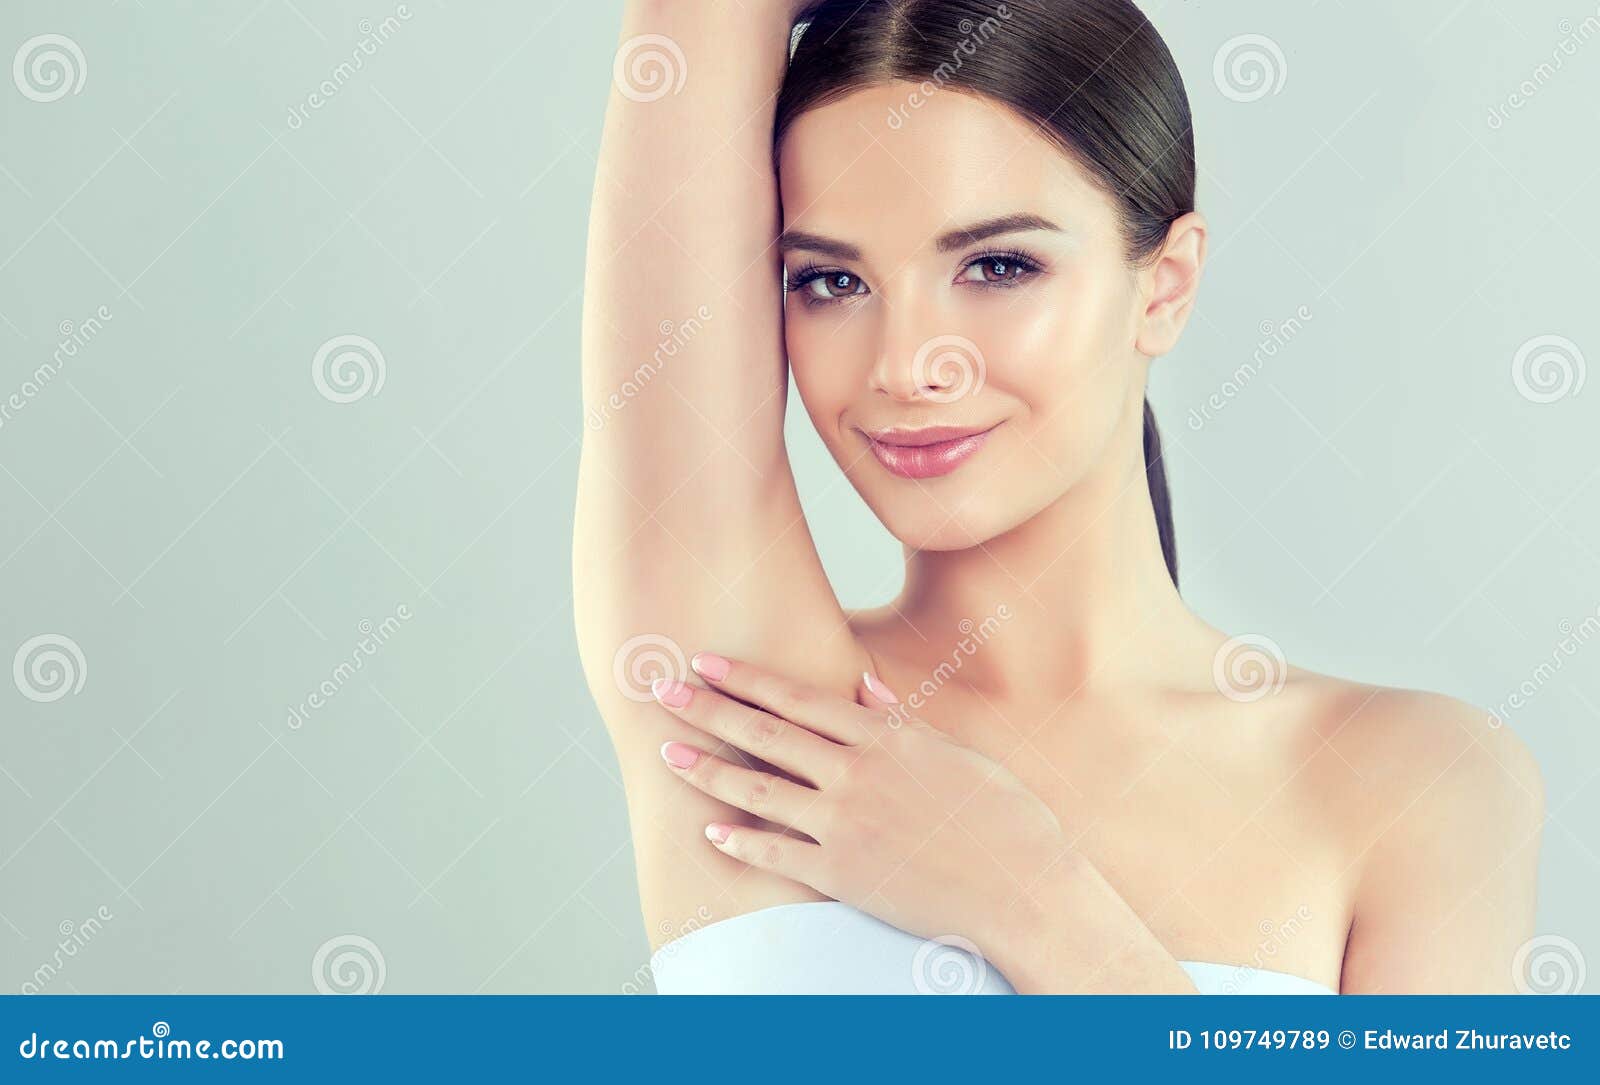 portrait of young woman with clean fresh skin and soft, delicate make up. woman is touching to own armpit tenderly.